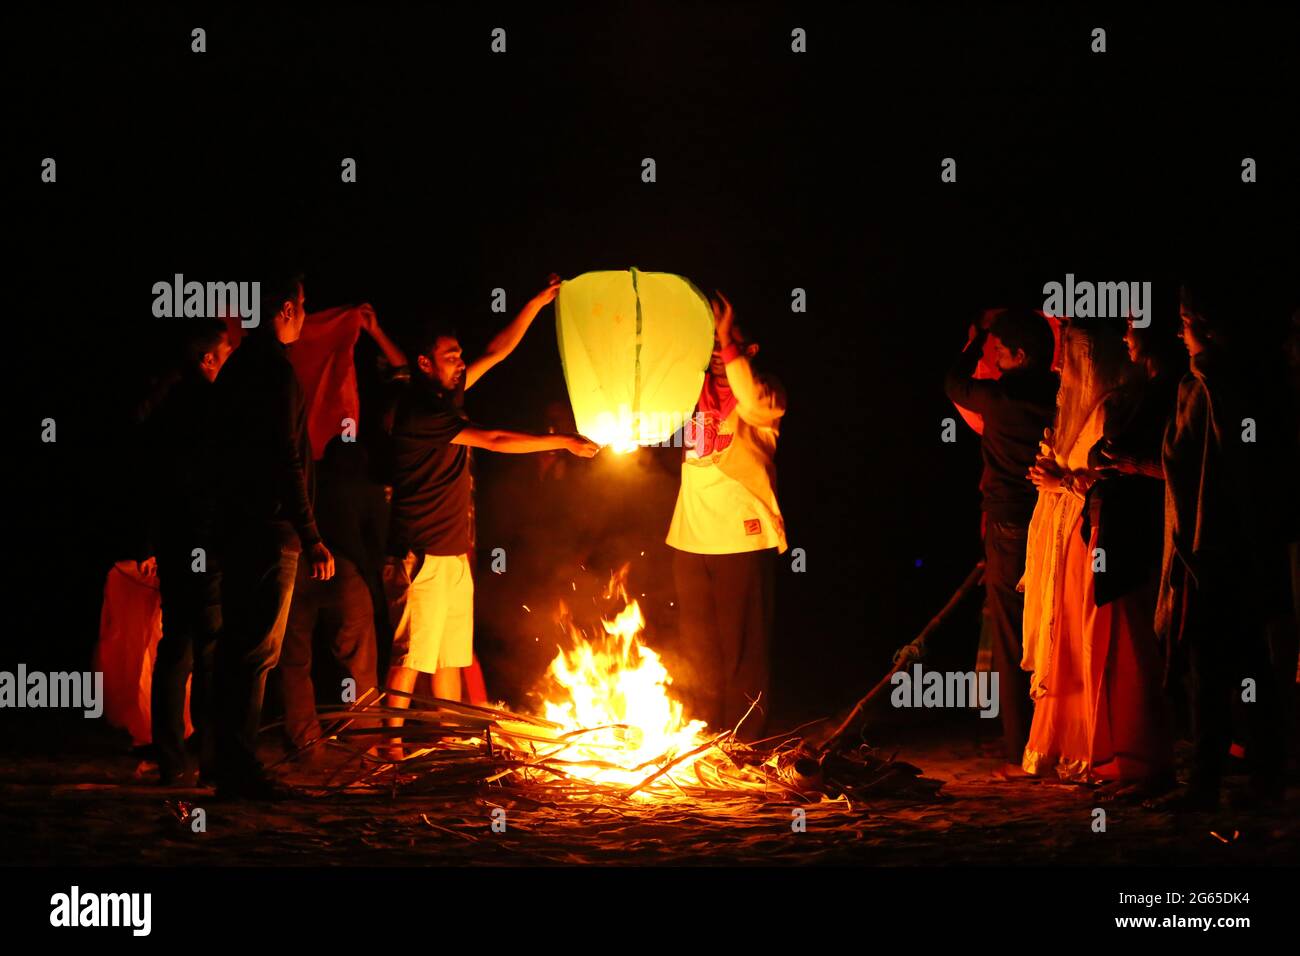 A Buddhist monk with his disciples trying to fly a paper lantern at Ujani Para Buddhist Temple in Bandarban, Bangladesh. Stock Photo